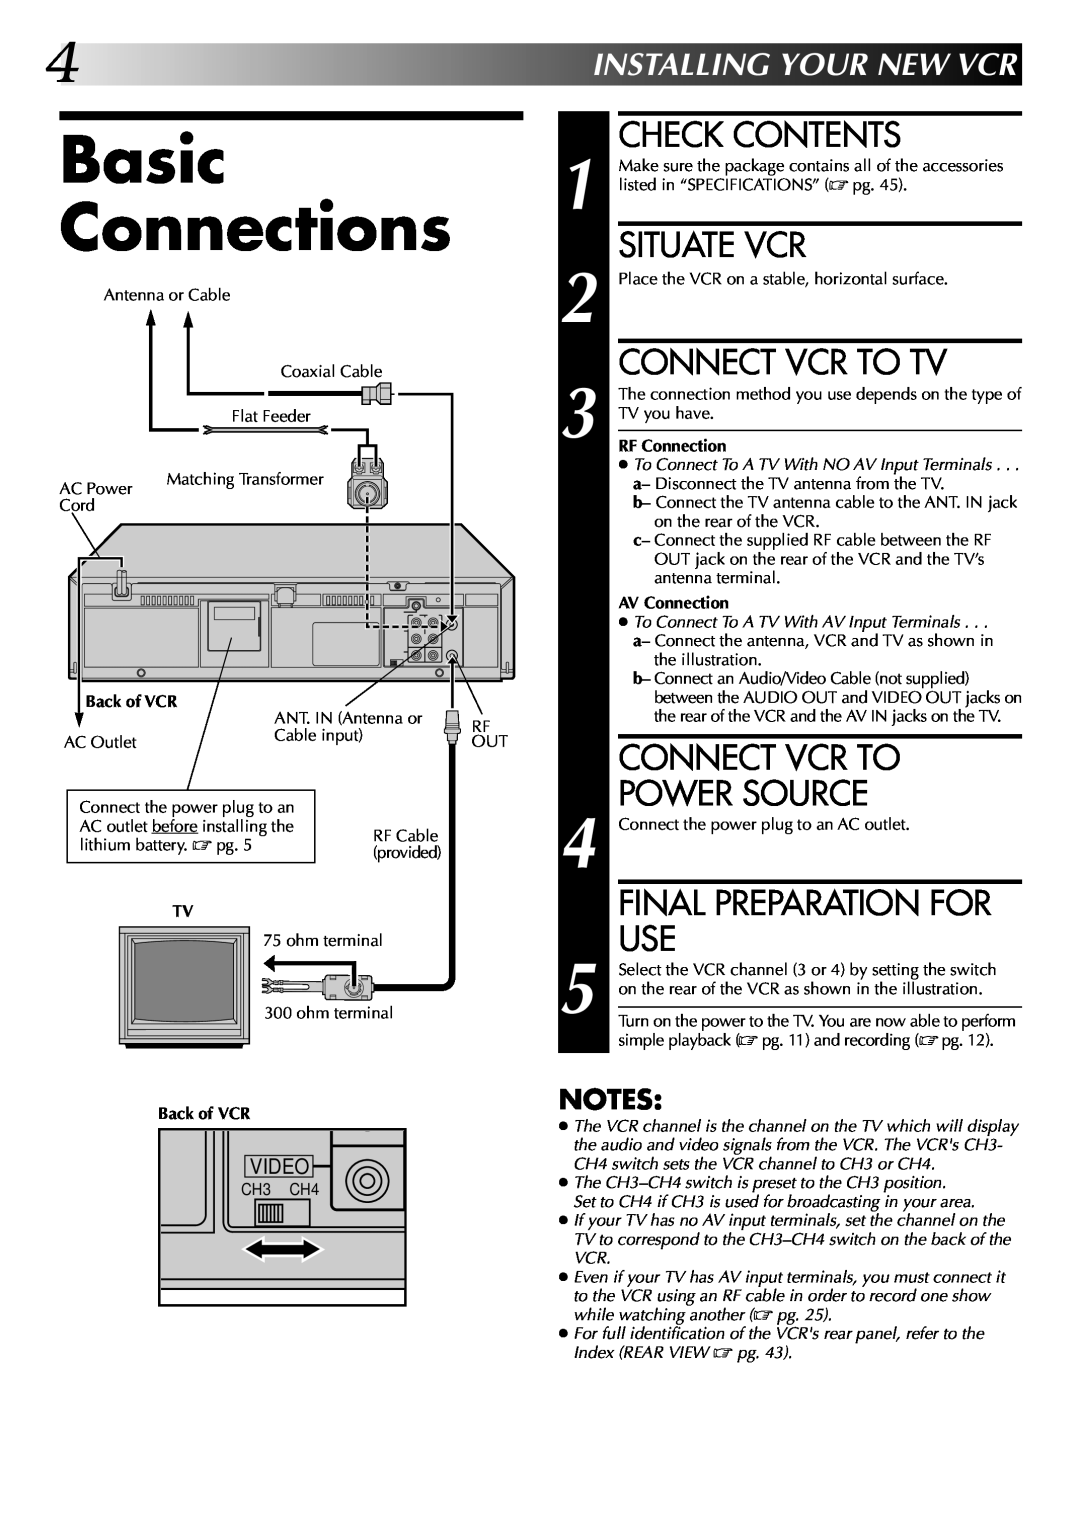 JVC HR-J7004UM manual Basic Connections, Check Contents, Situate Vcr, Connect Vcr To Tv, Connect Vcr To Power Source, Video 